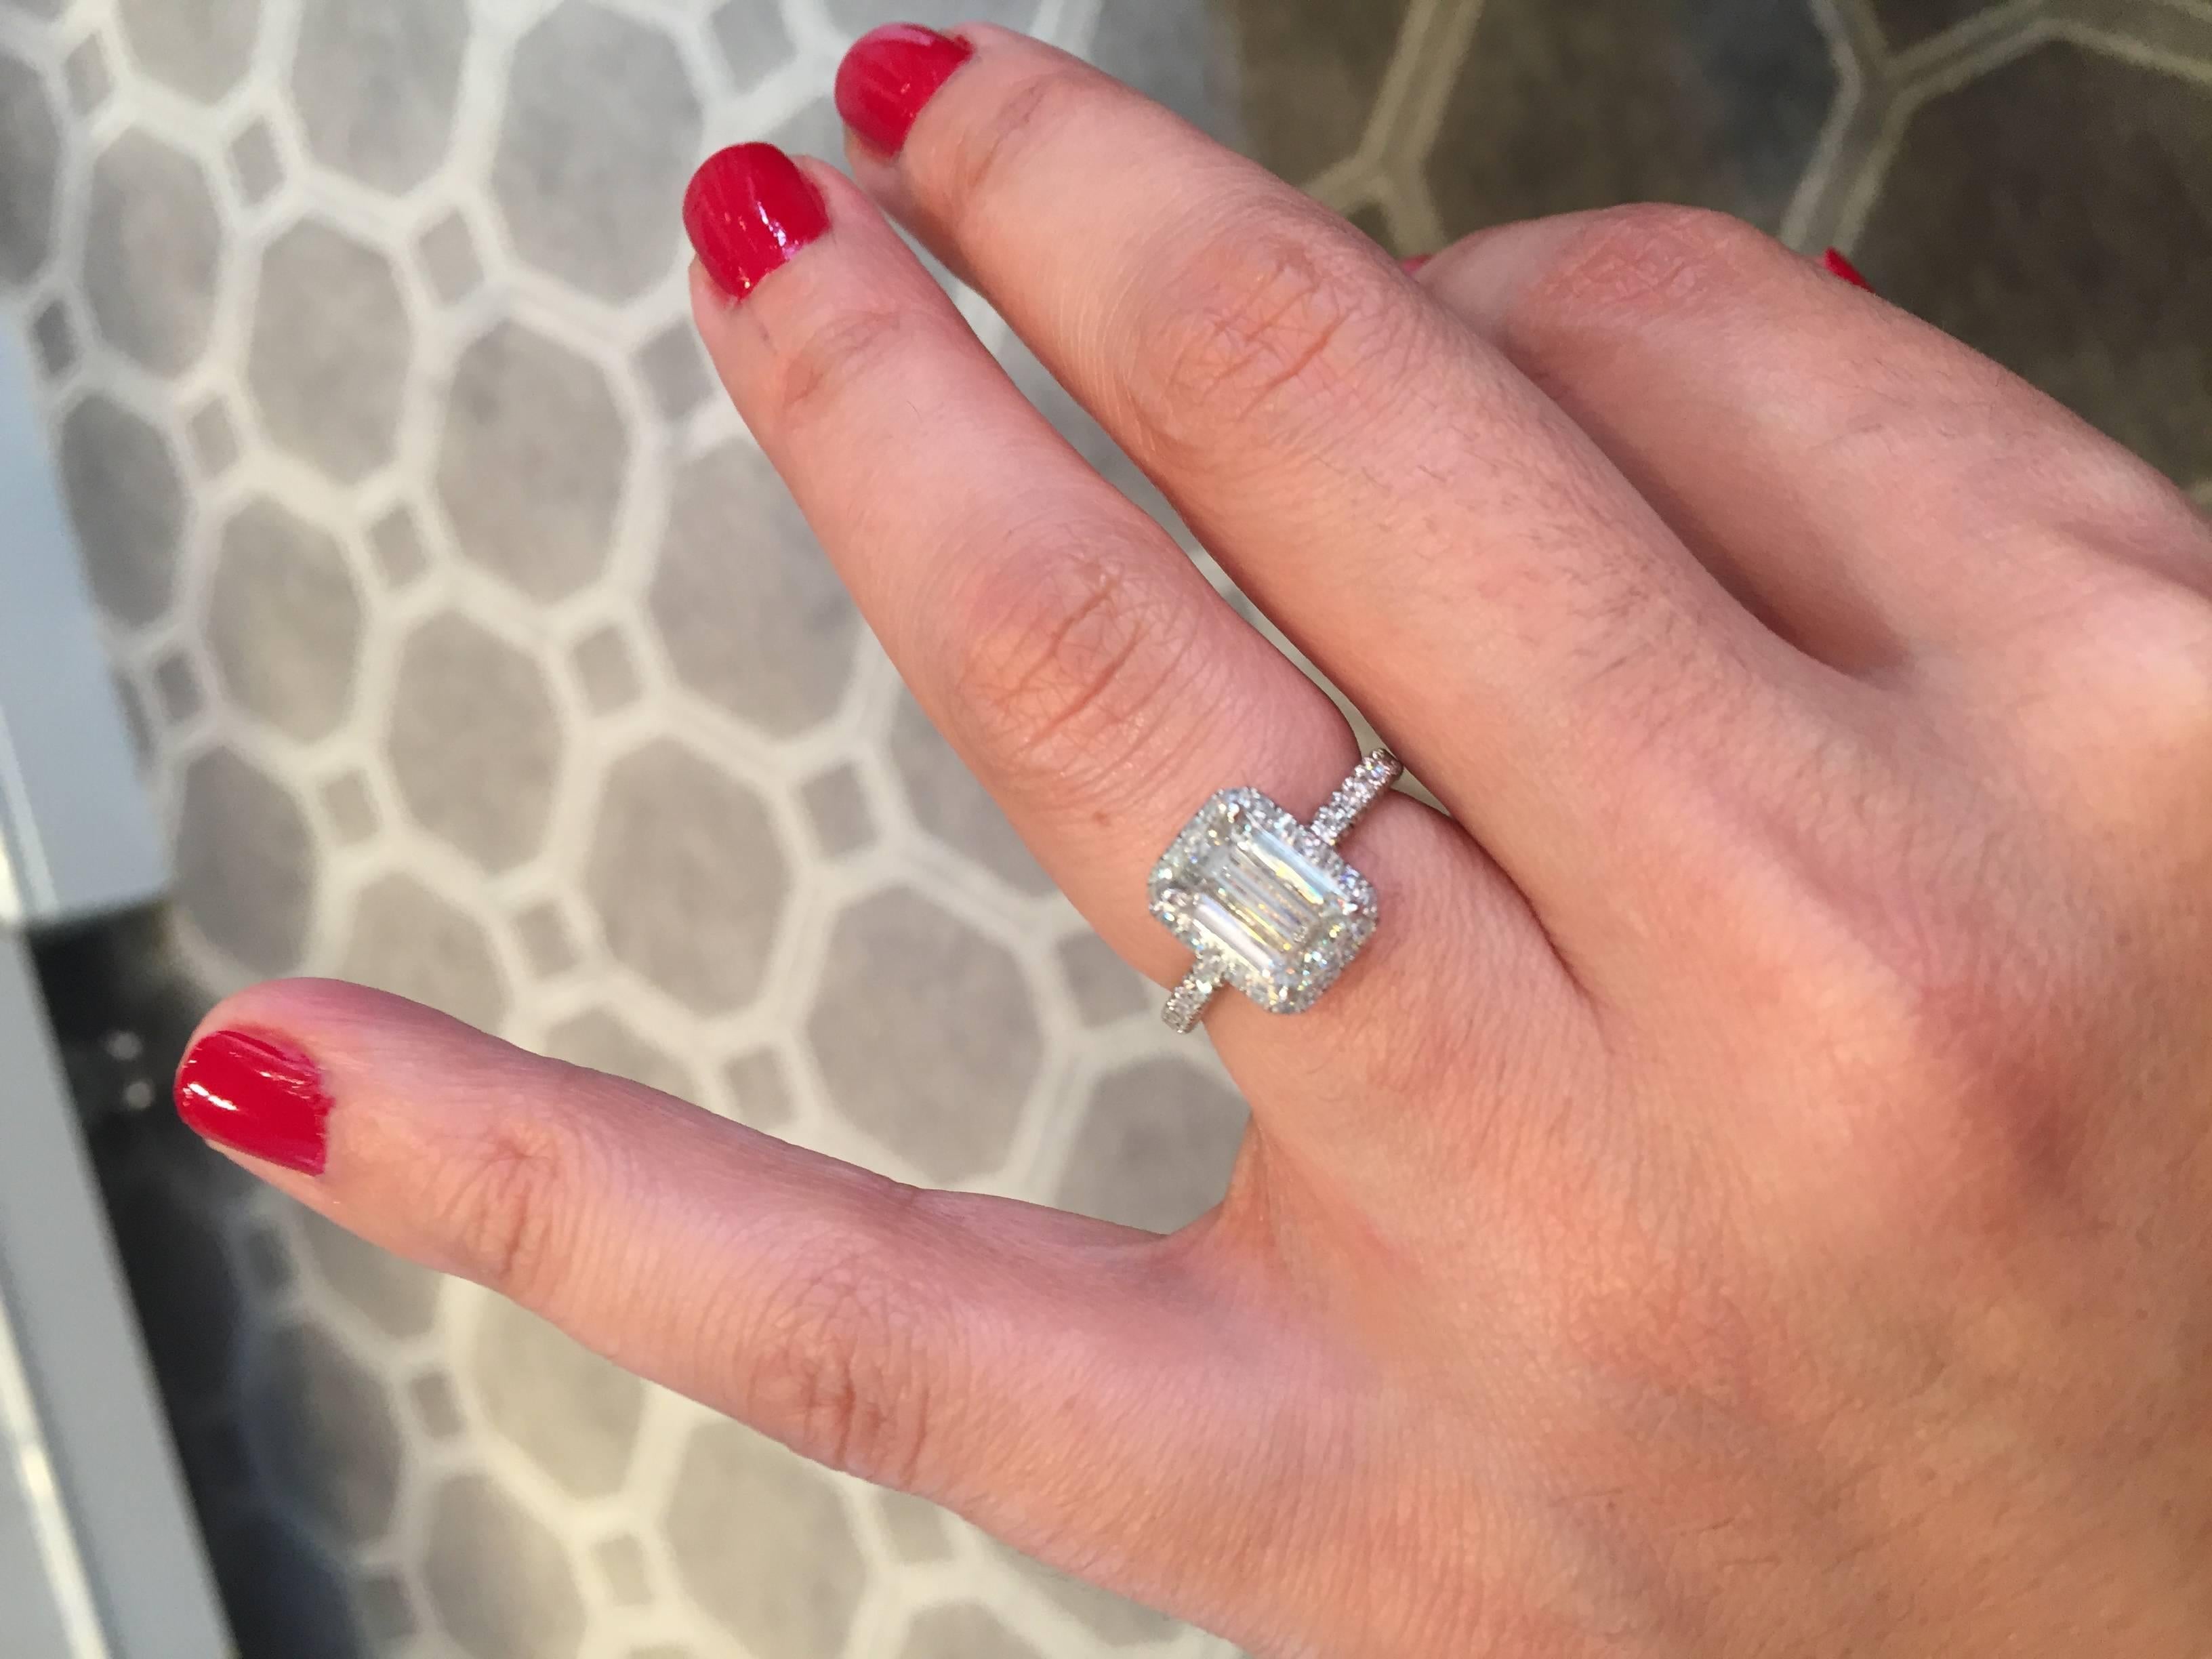 2.01 J color VVS2 clarity Emerald Cut Diamond Engagement Ring

The Marisa Perry InLove setting is handmade with platinum and micro-pave diamonds with an additional 0.45 carats of round brilliant diamonds.  

Each diamond is perfectly hand set under